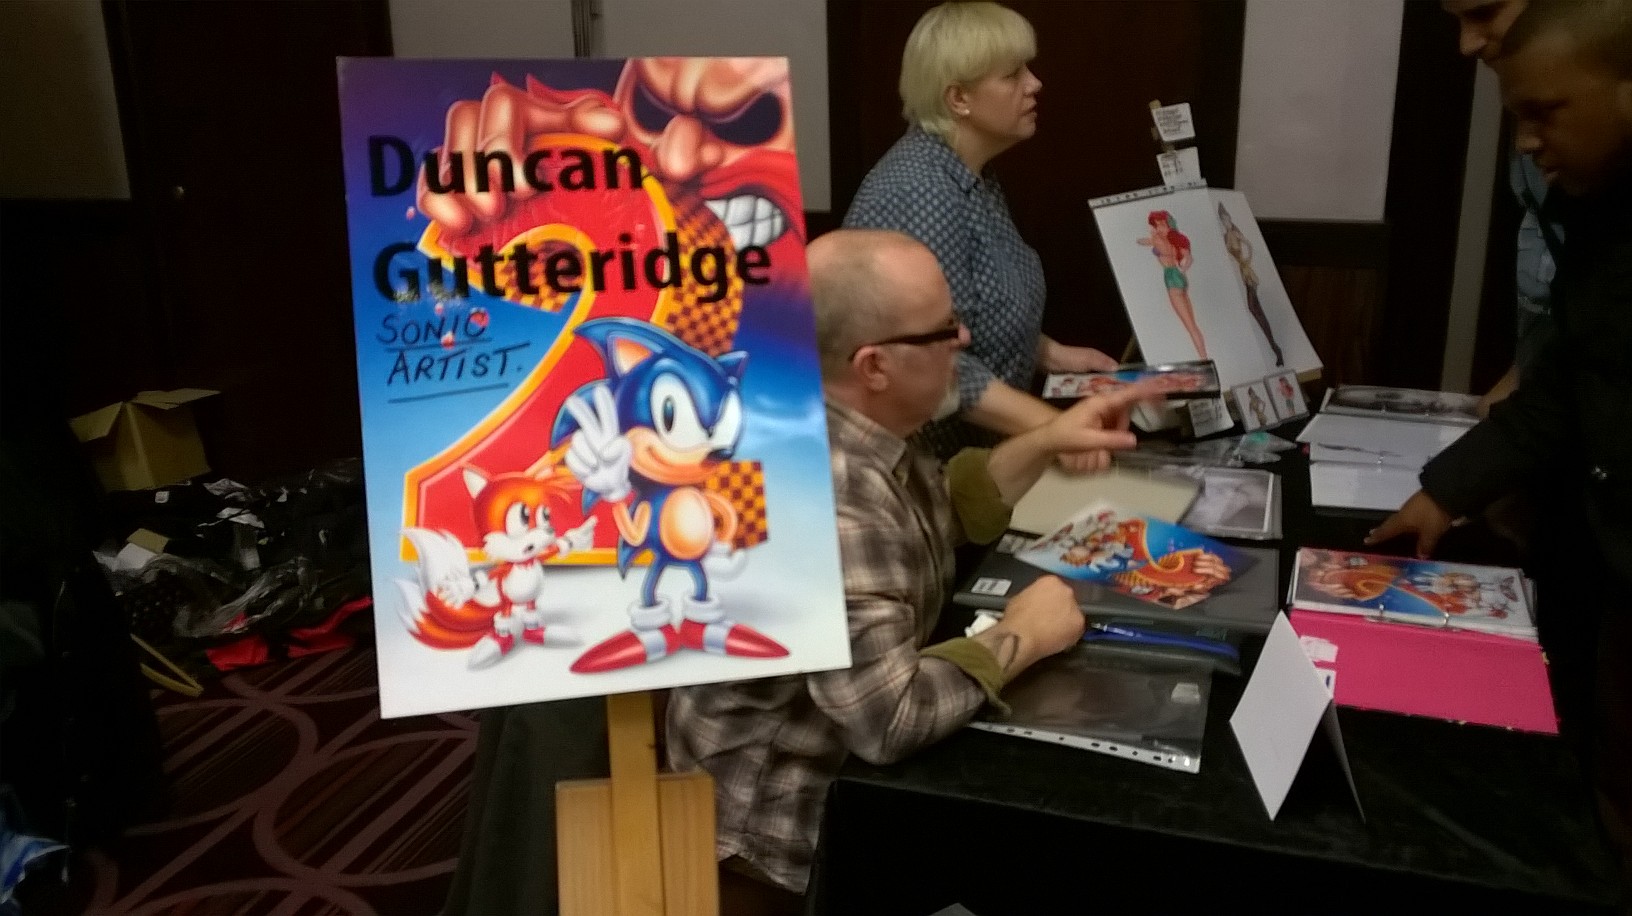 Sonic 2 Cover artist, Duncan Gutteridge, was signing prints of his iconic work